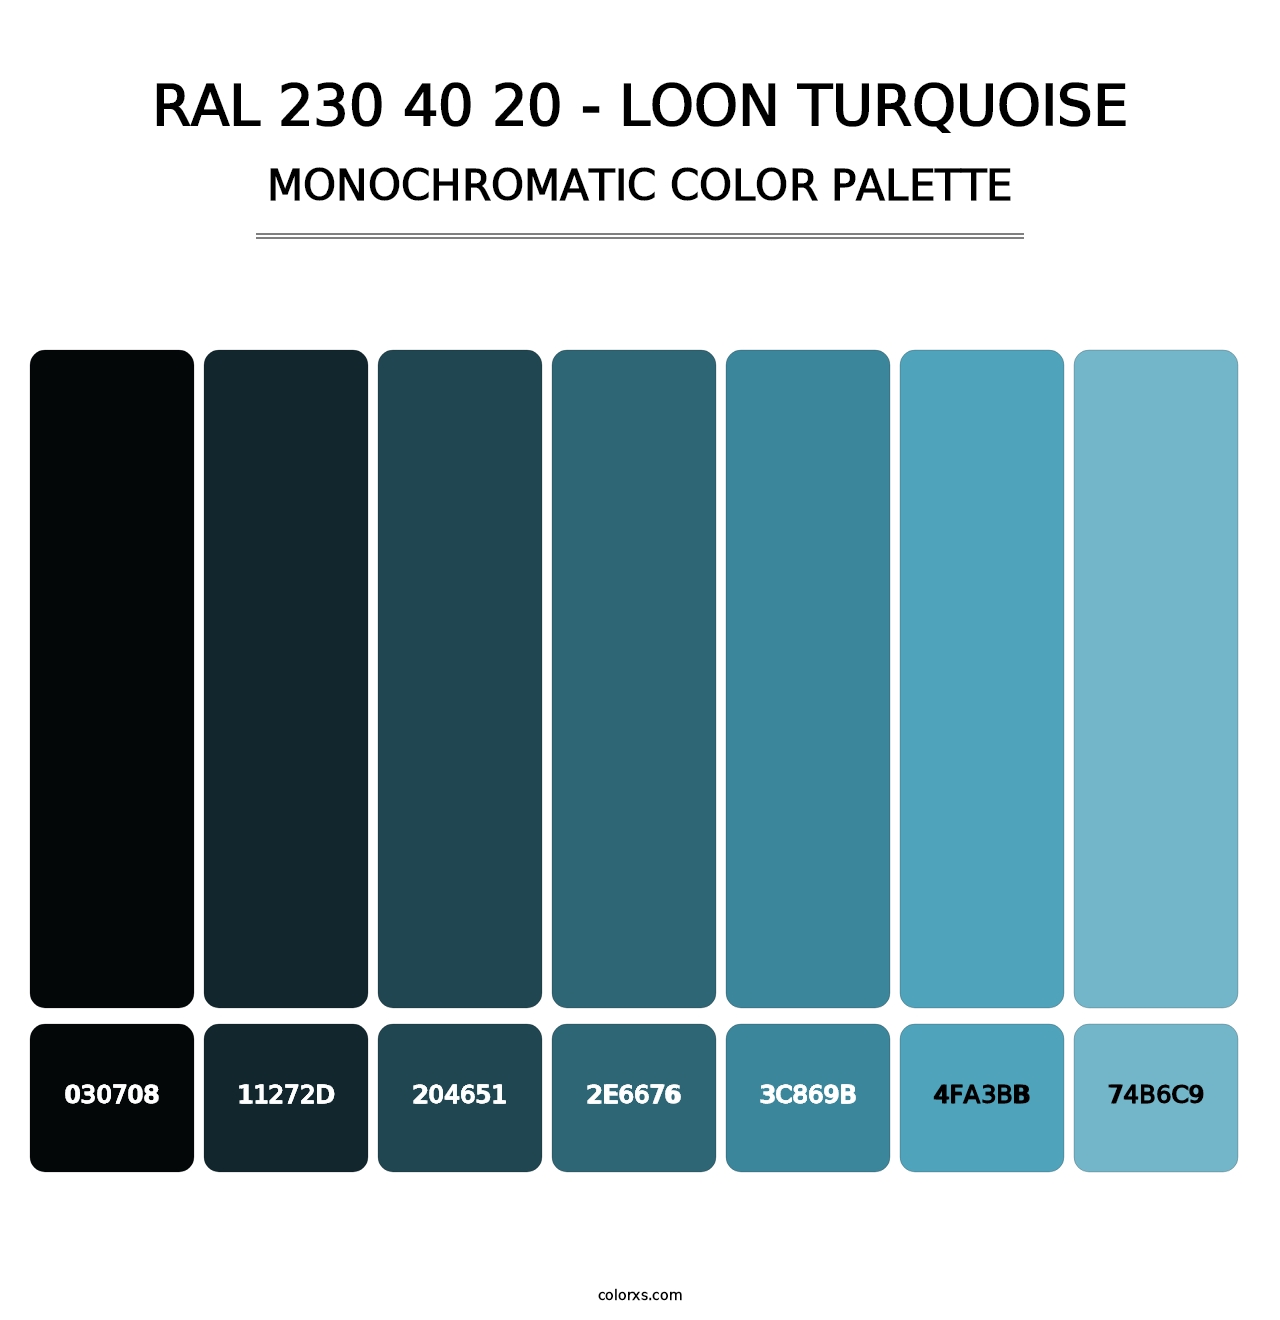 RAL 230 40 20 - Loon Turquoise - Monochromatic Color Palette